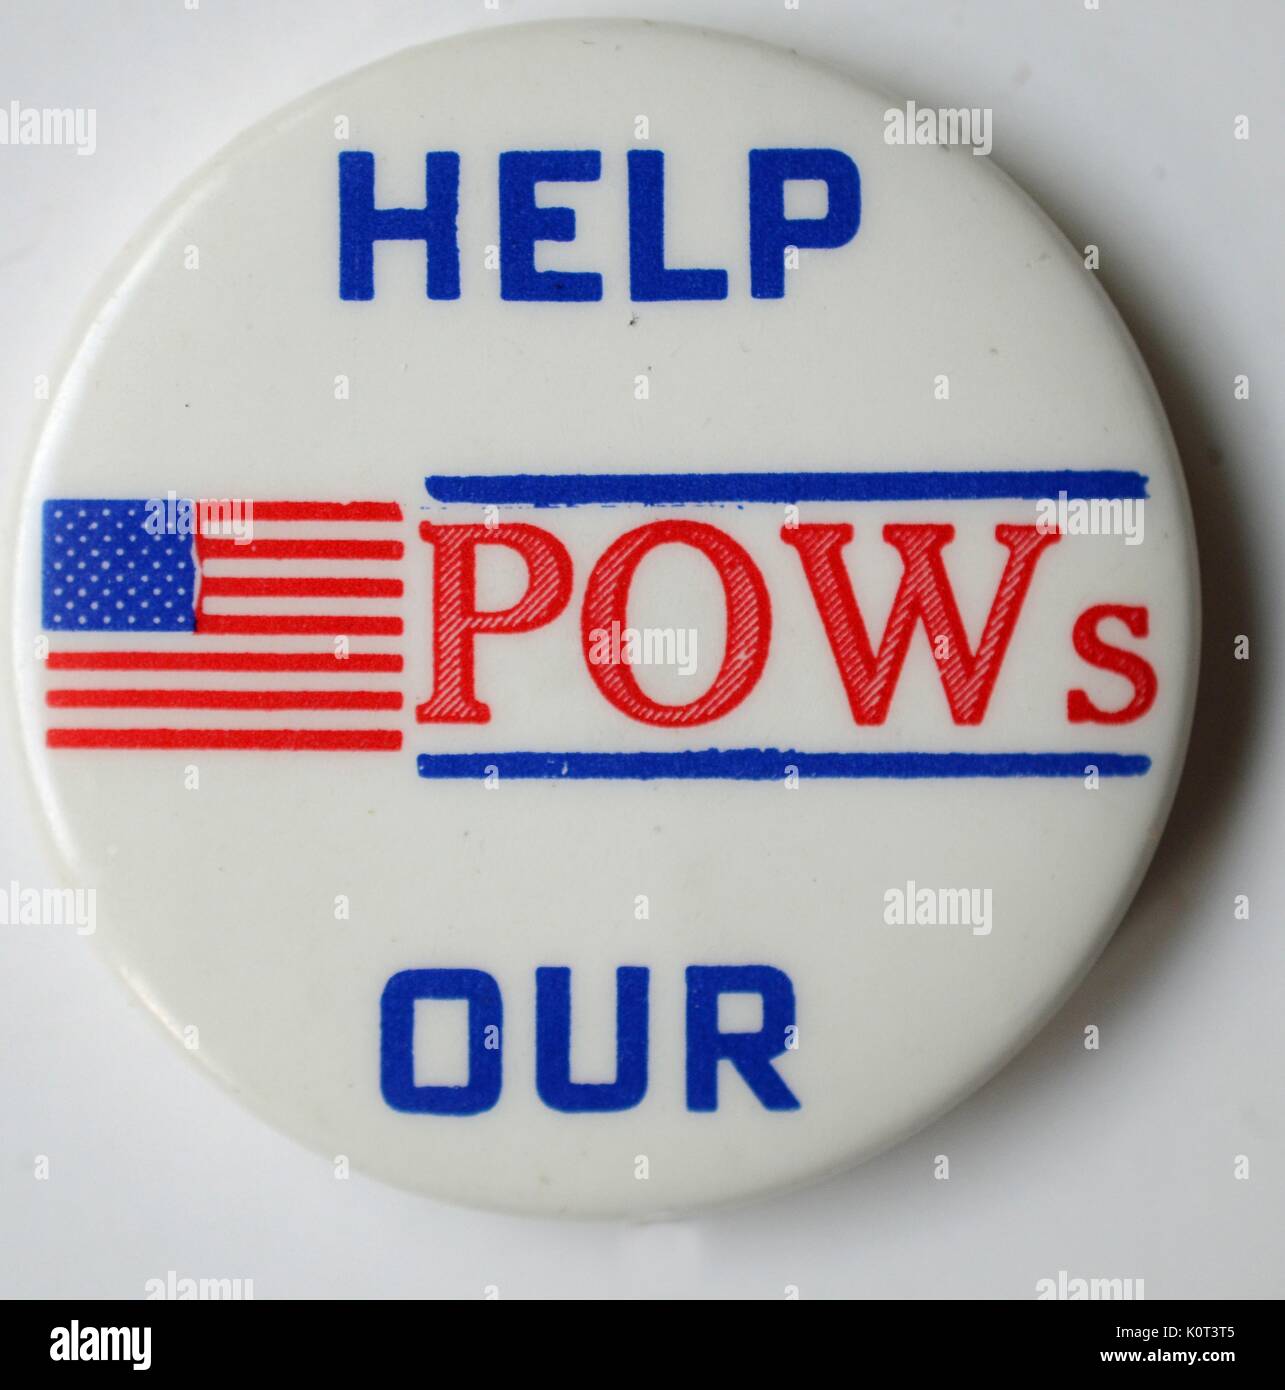 Help Our POWS, a pin expressing support for American prisoners of war during the Vietnam War, with red, white and blue lettering and an image of the American flag, 1965. Stock Photo